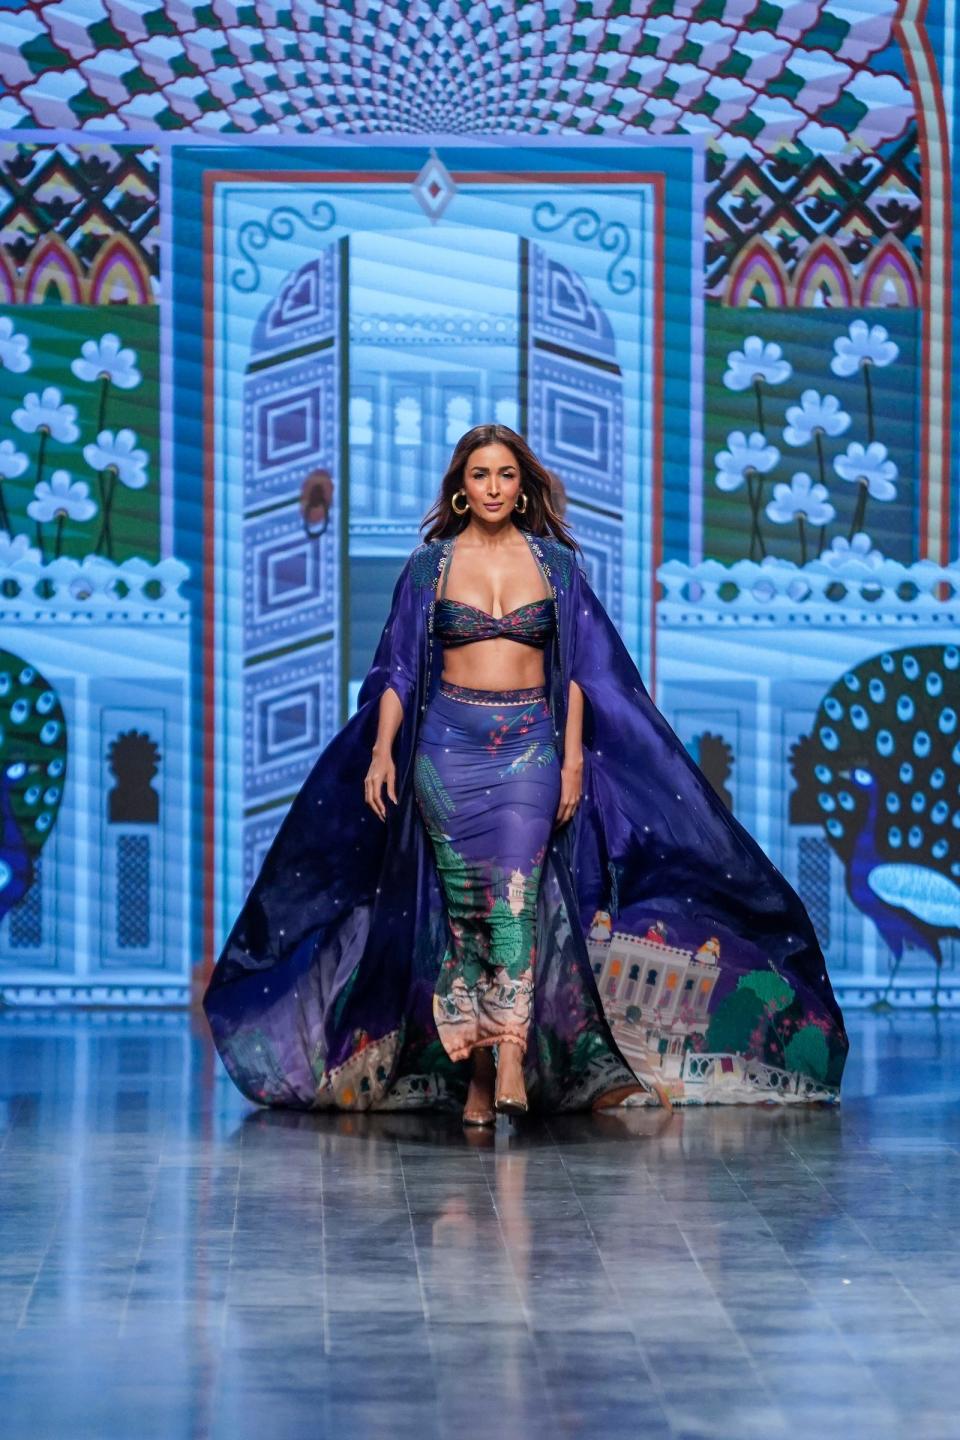 Malaika Arora walks the ramp during Iimerick show at the FDCI x Lakmé Fashion Week 2022 at Jio World Convention Centre in Mumbai, India on 14th October 2022.

Photo : FS Images / FDCI x Lakme Fashion Week / RISE Worldwide